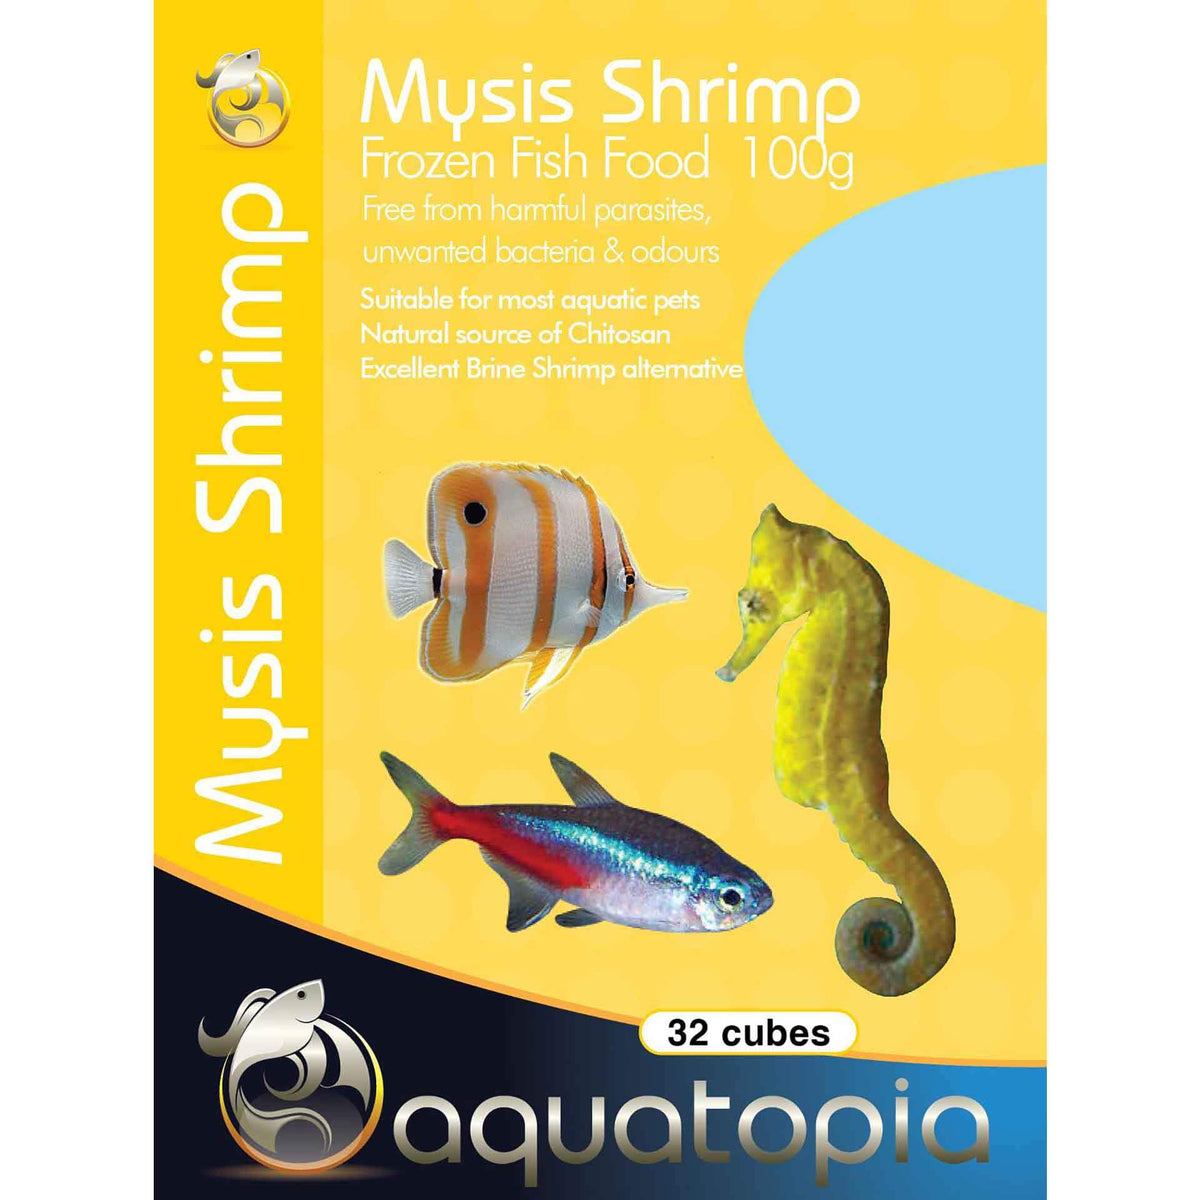 Aquatopia Mysis Shrimp 100g - Frozen Food - In Store Pick Up Only